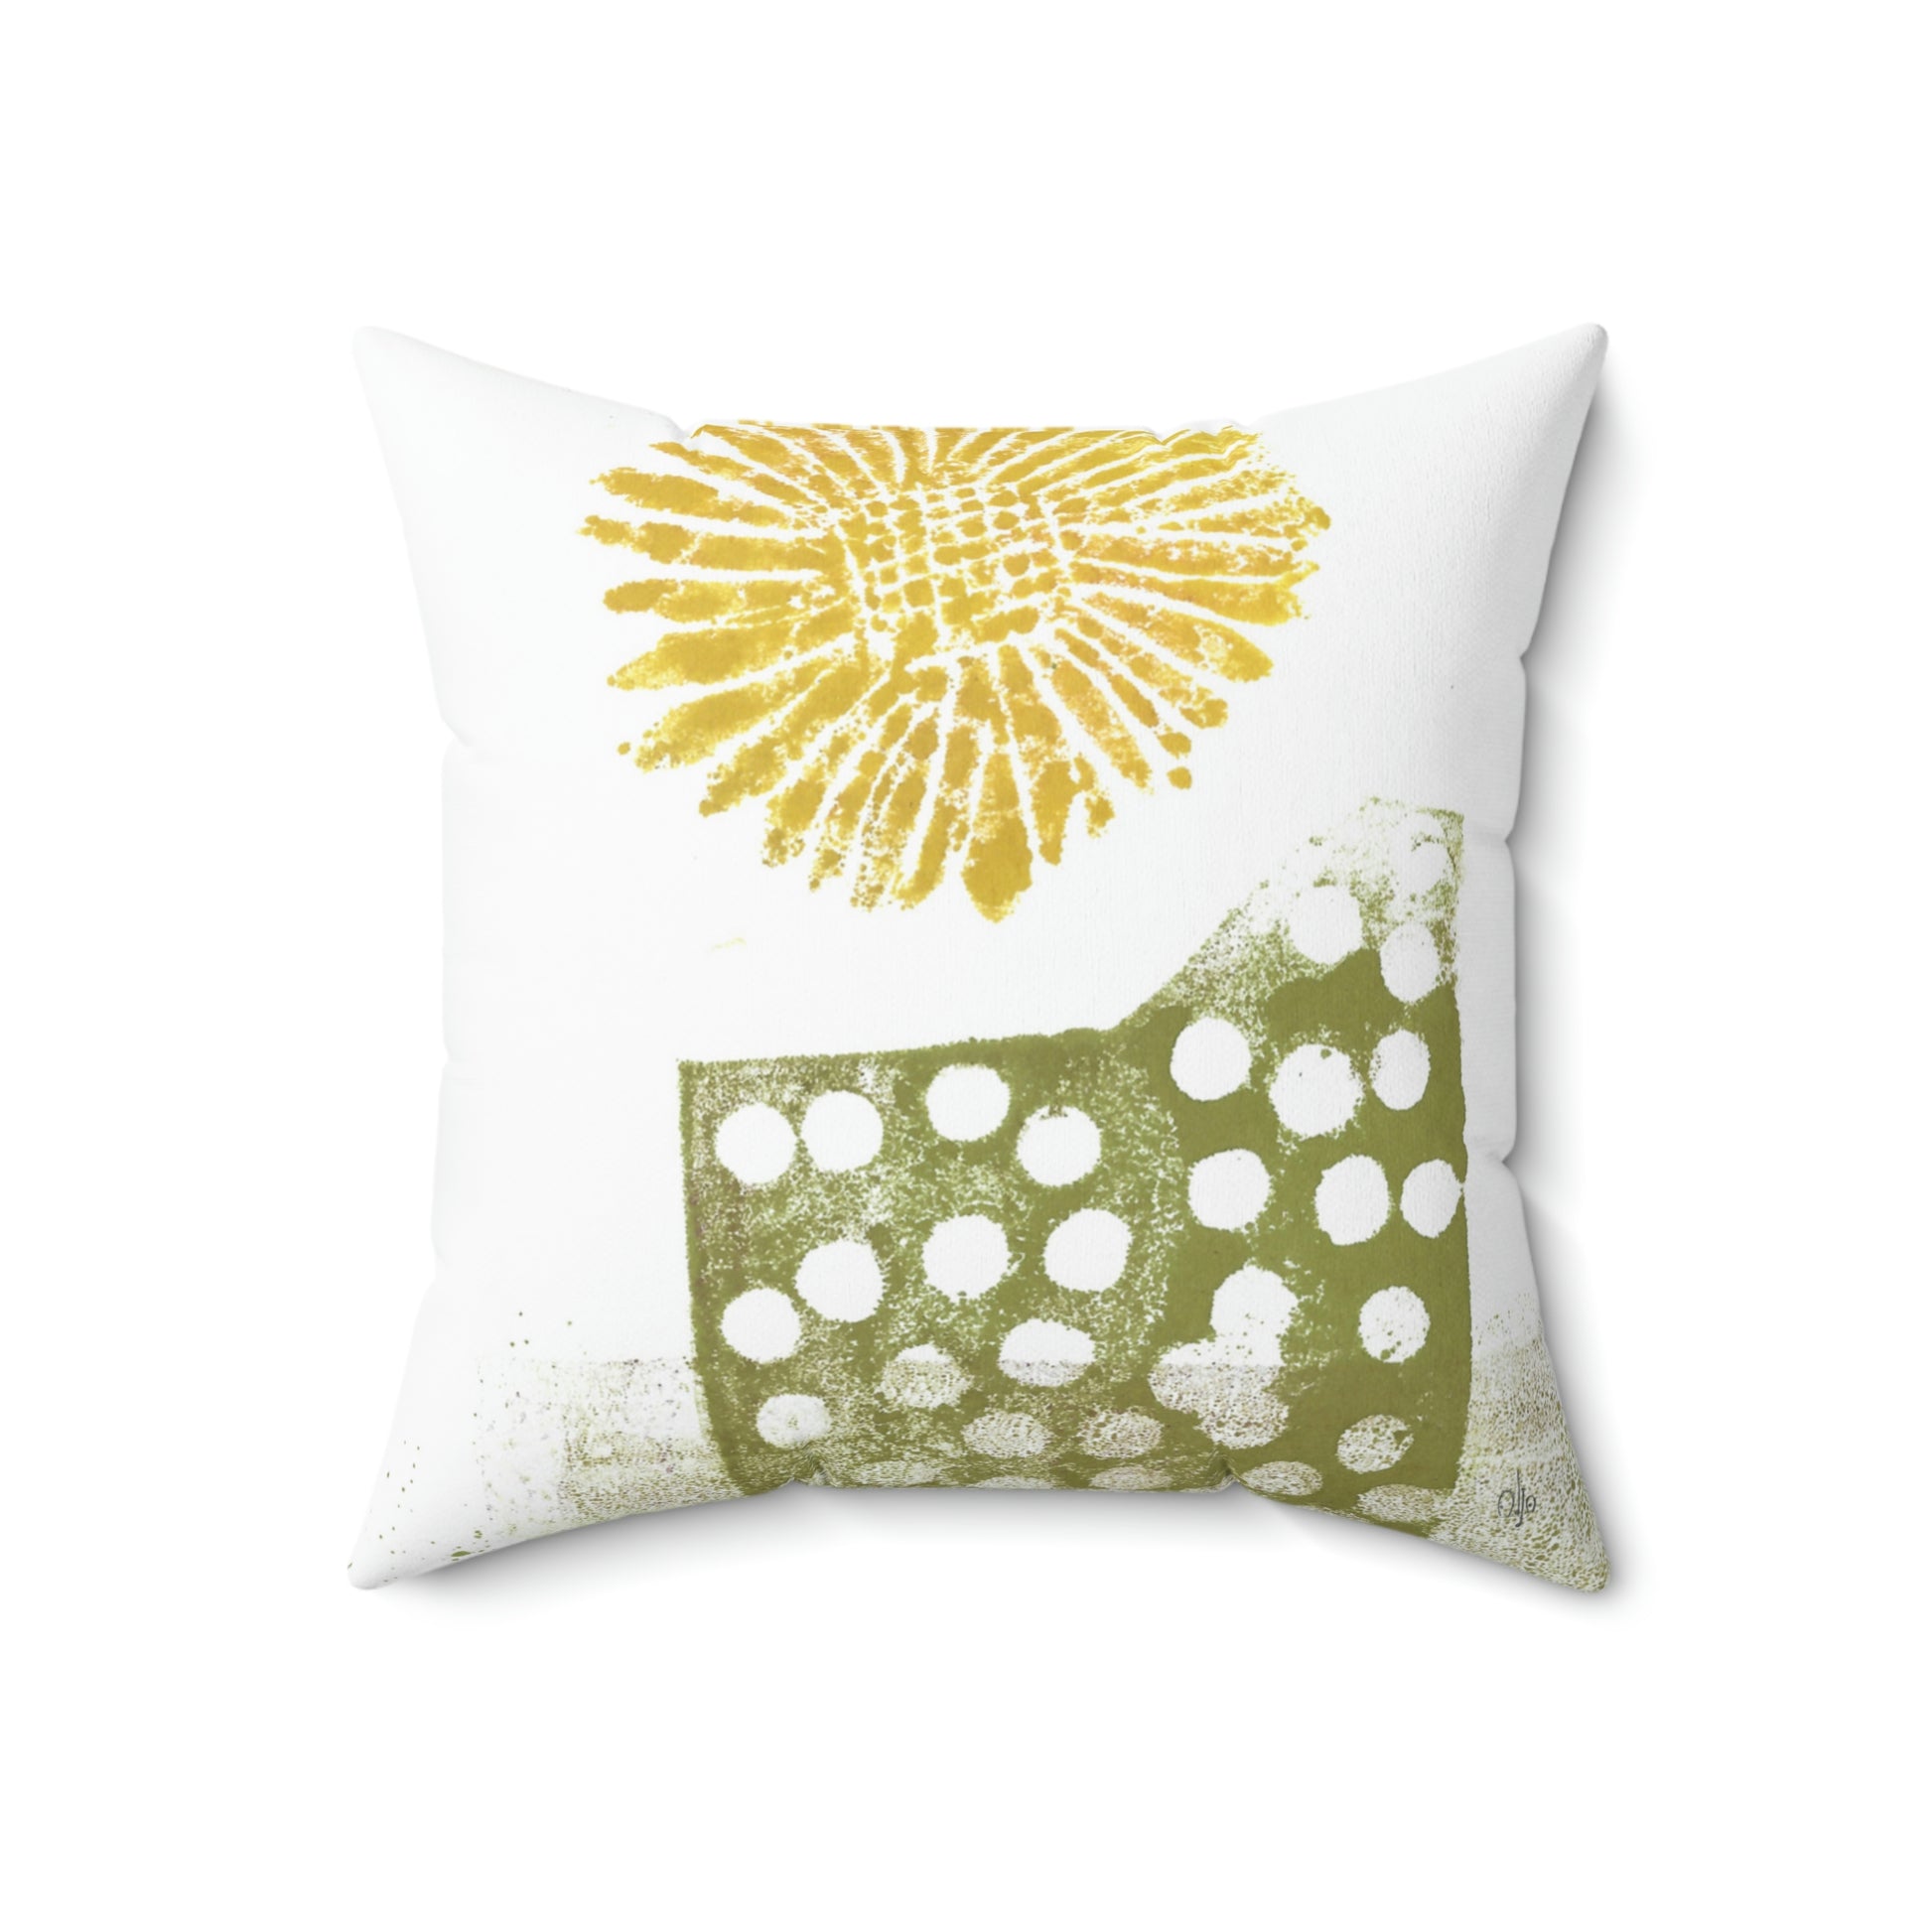 Abstract Flower Square Pillow - Alja Design